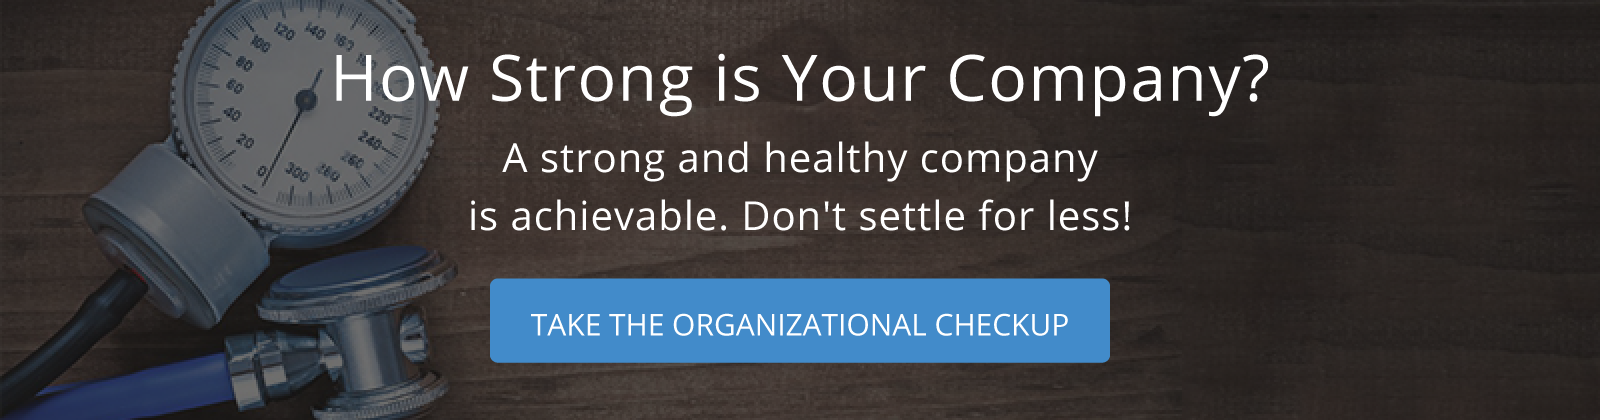 How strong is your company? Find out with our organizational checkup. Click here to get started!